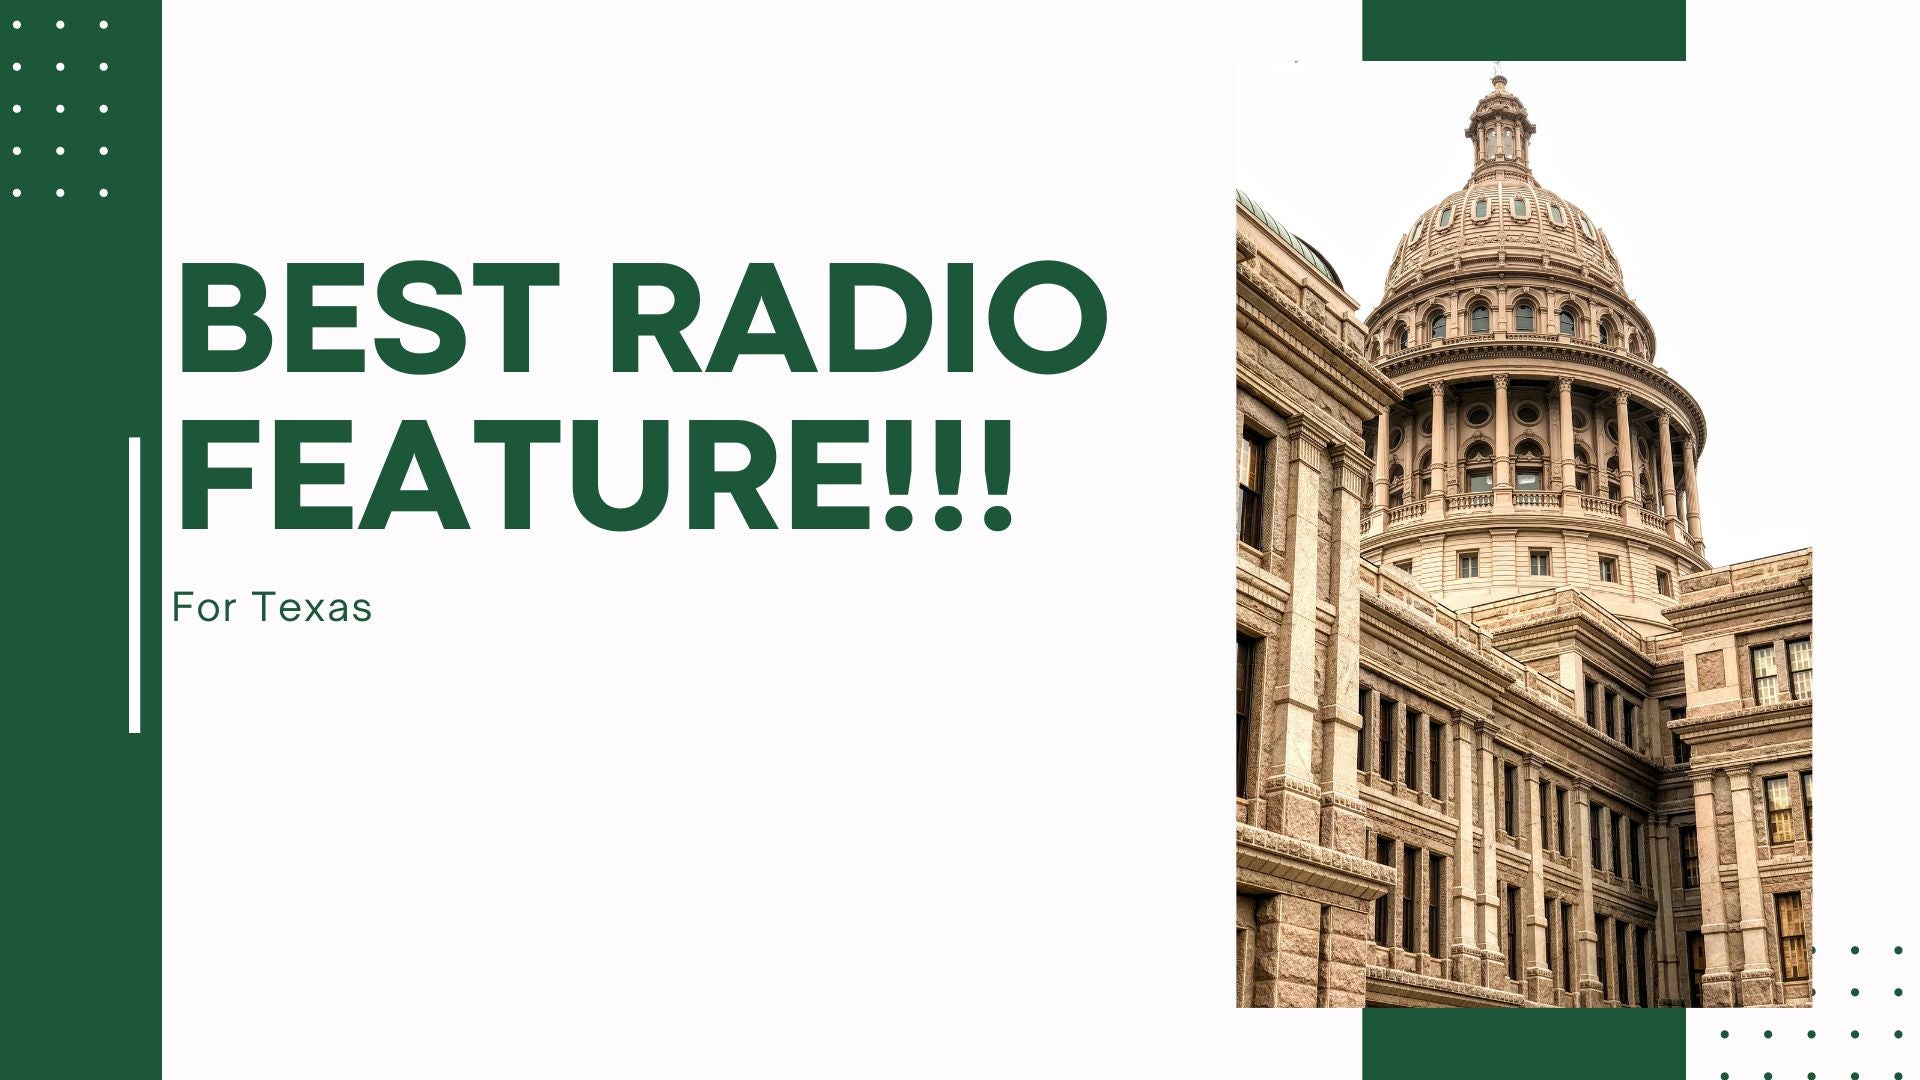 What's The Best Radio Feature In Texas?